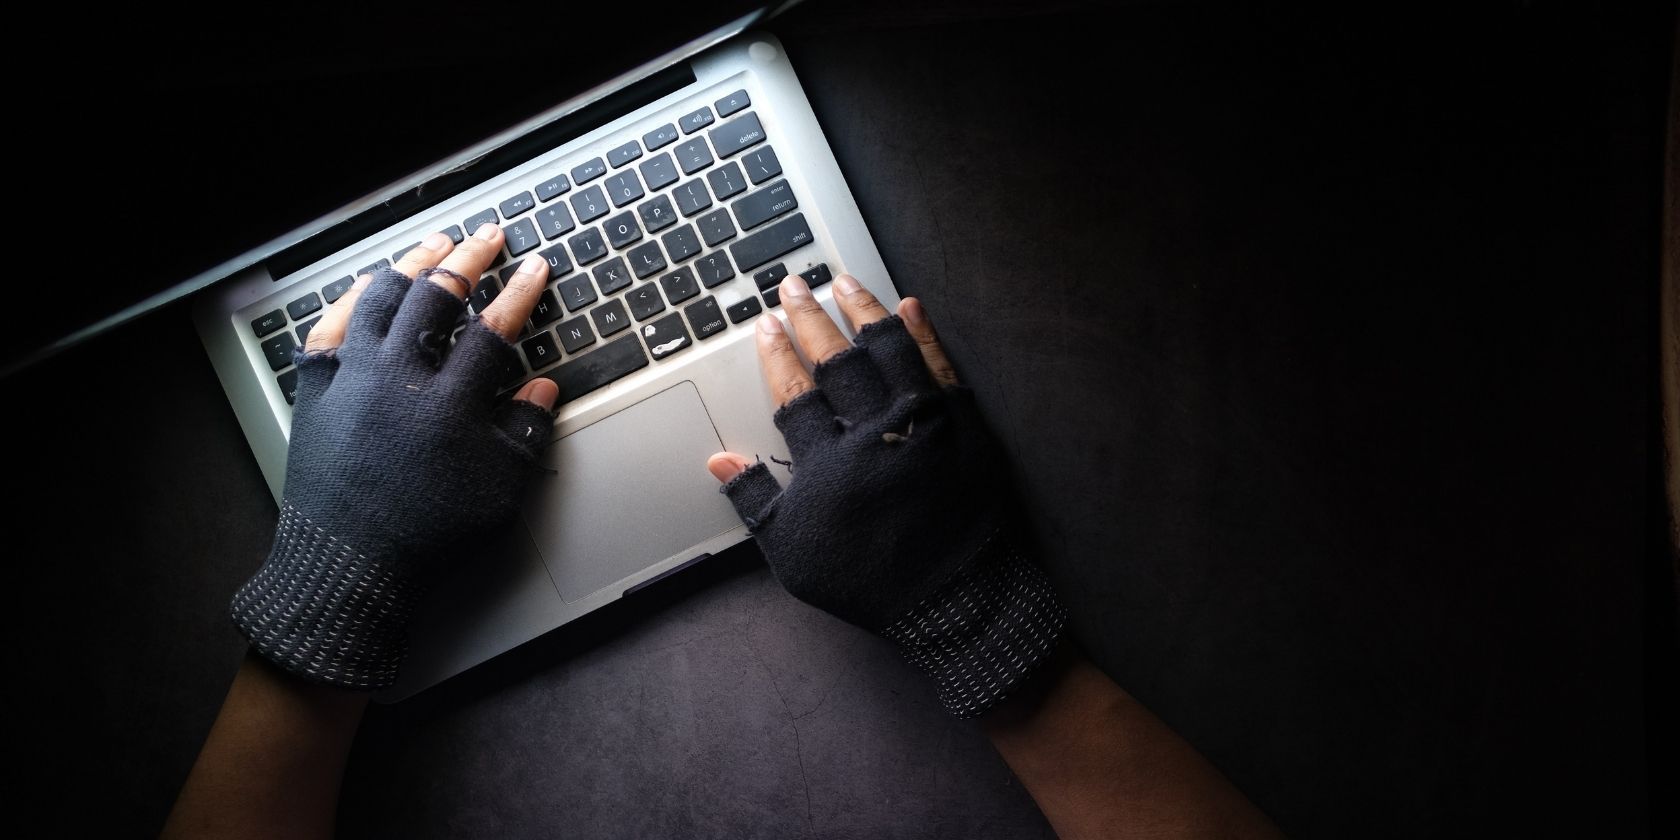 hands in black fingerless gloves typing on a laptop in a dark room